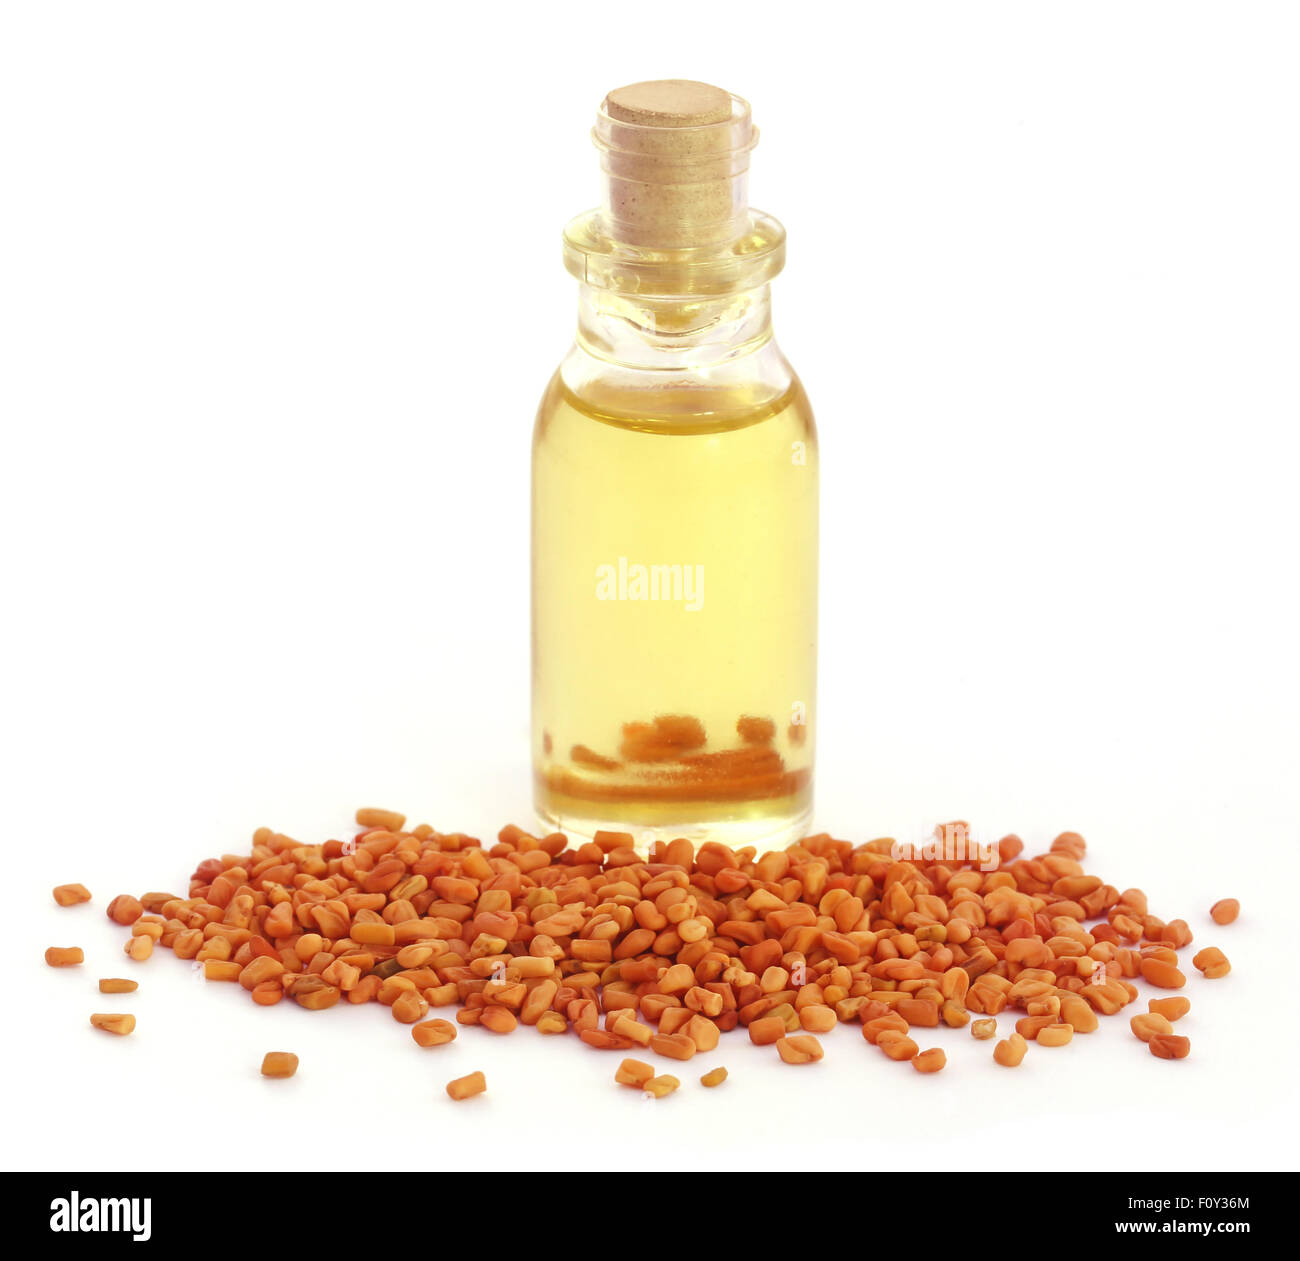 Fenugreek with oil in bottle over white background Stock Photo